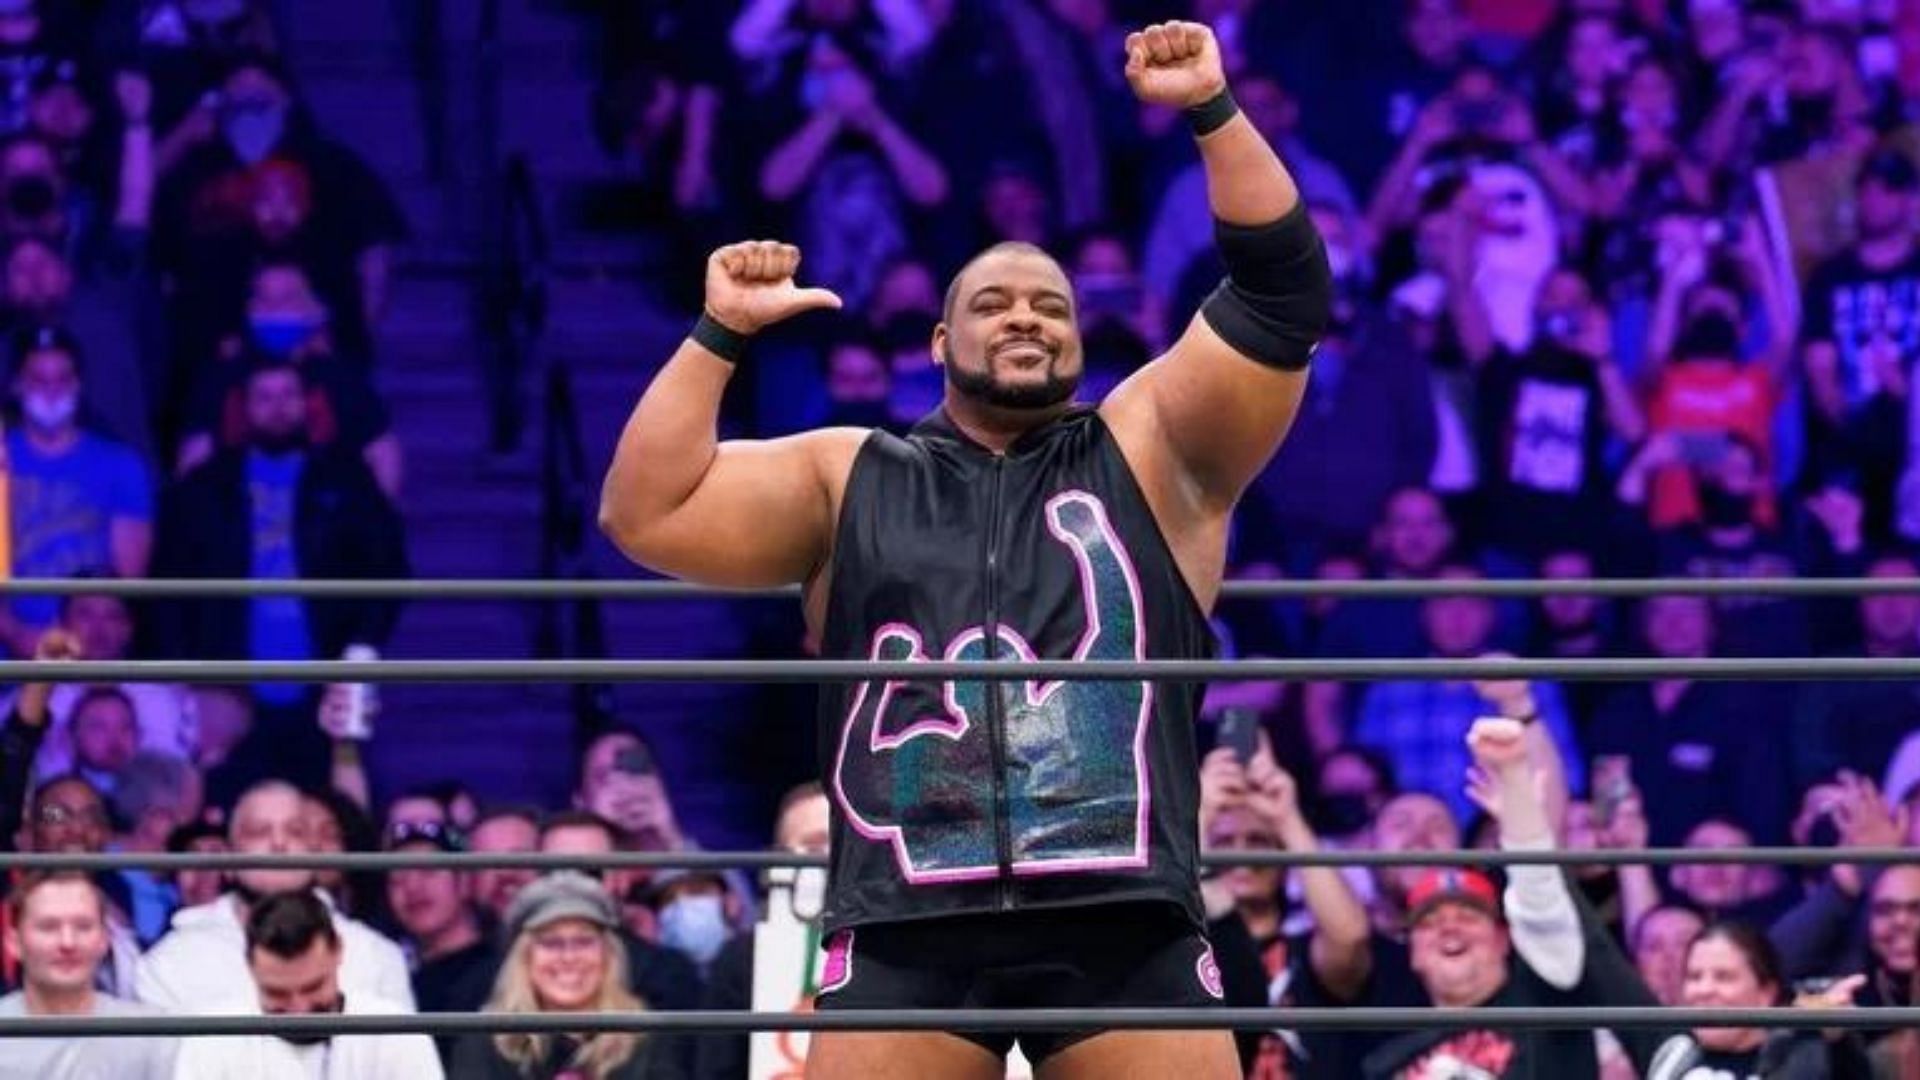 Keith lee is a current AEW star